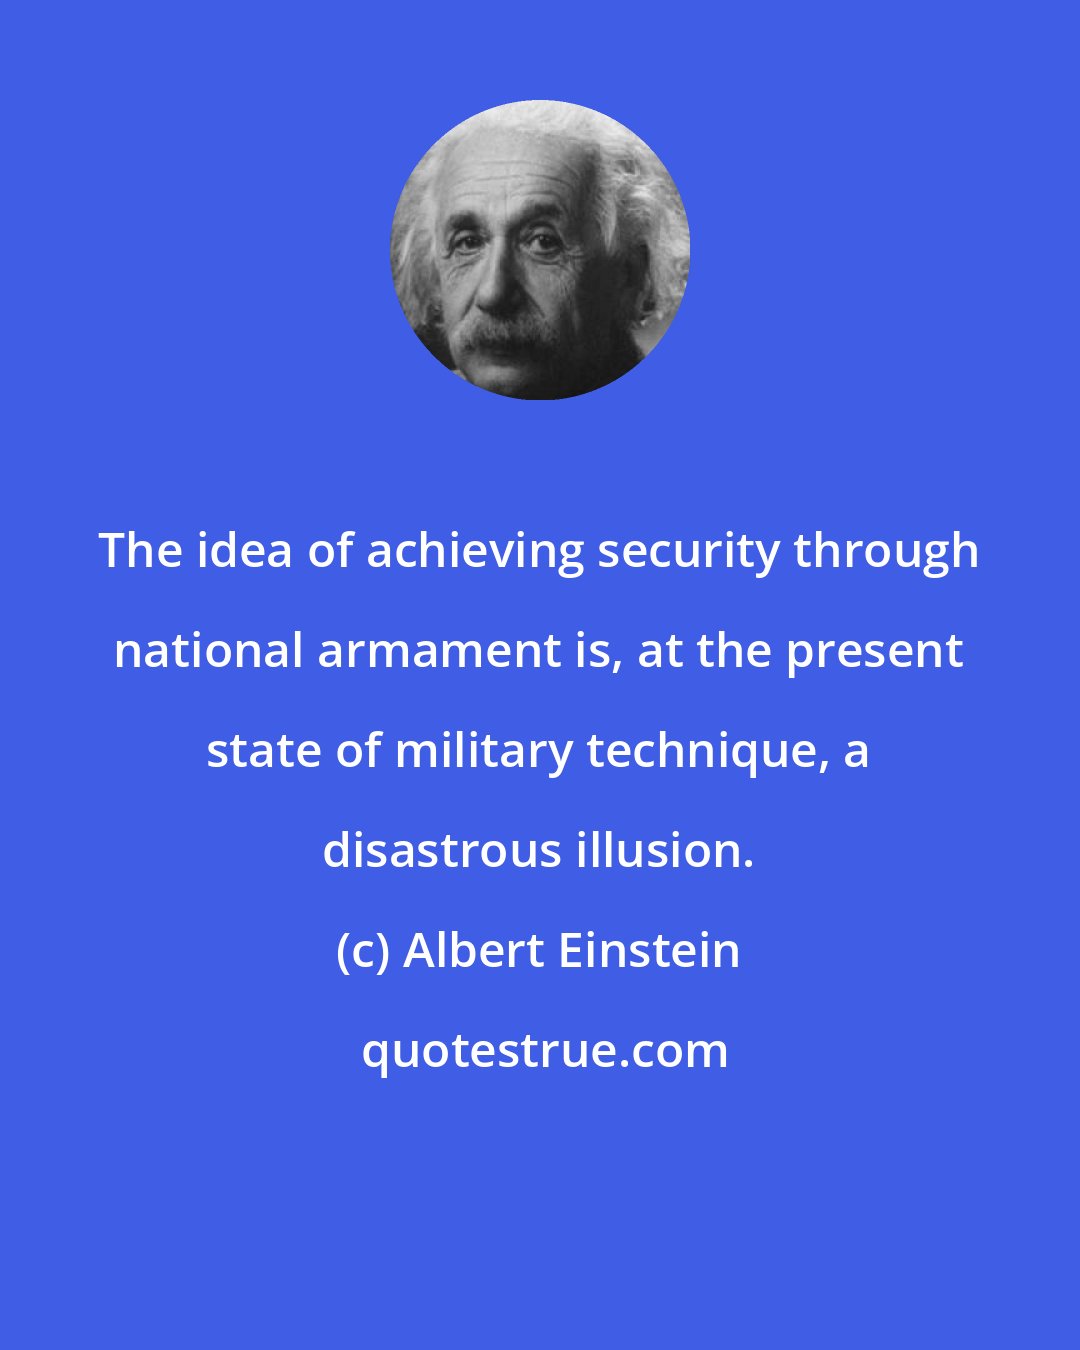 Albert Einstein: The idea of achieving security through national armament is, at the present state of military technique, a disastrous illusion.